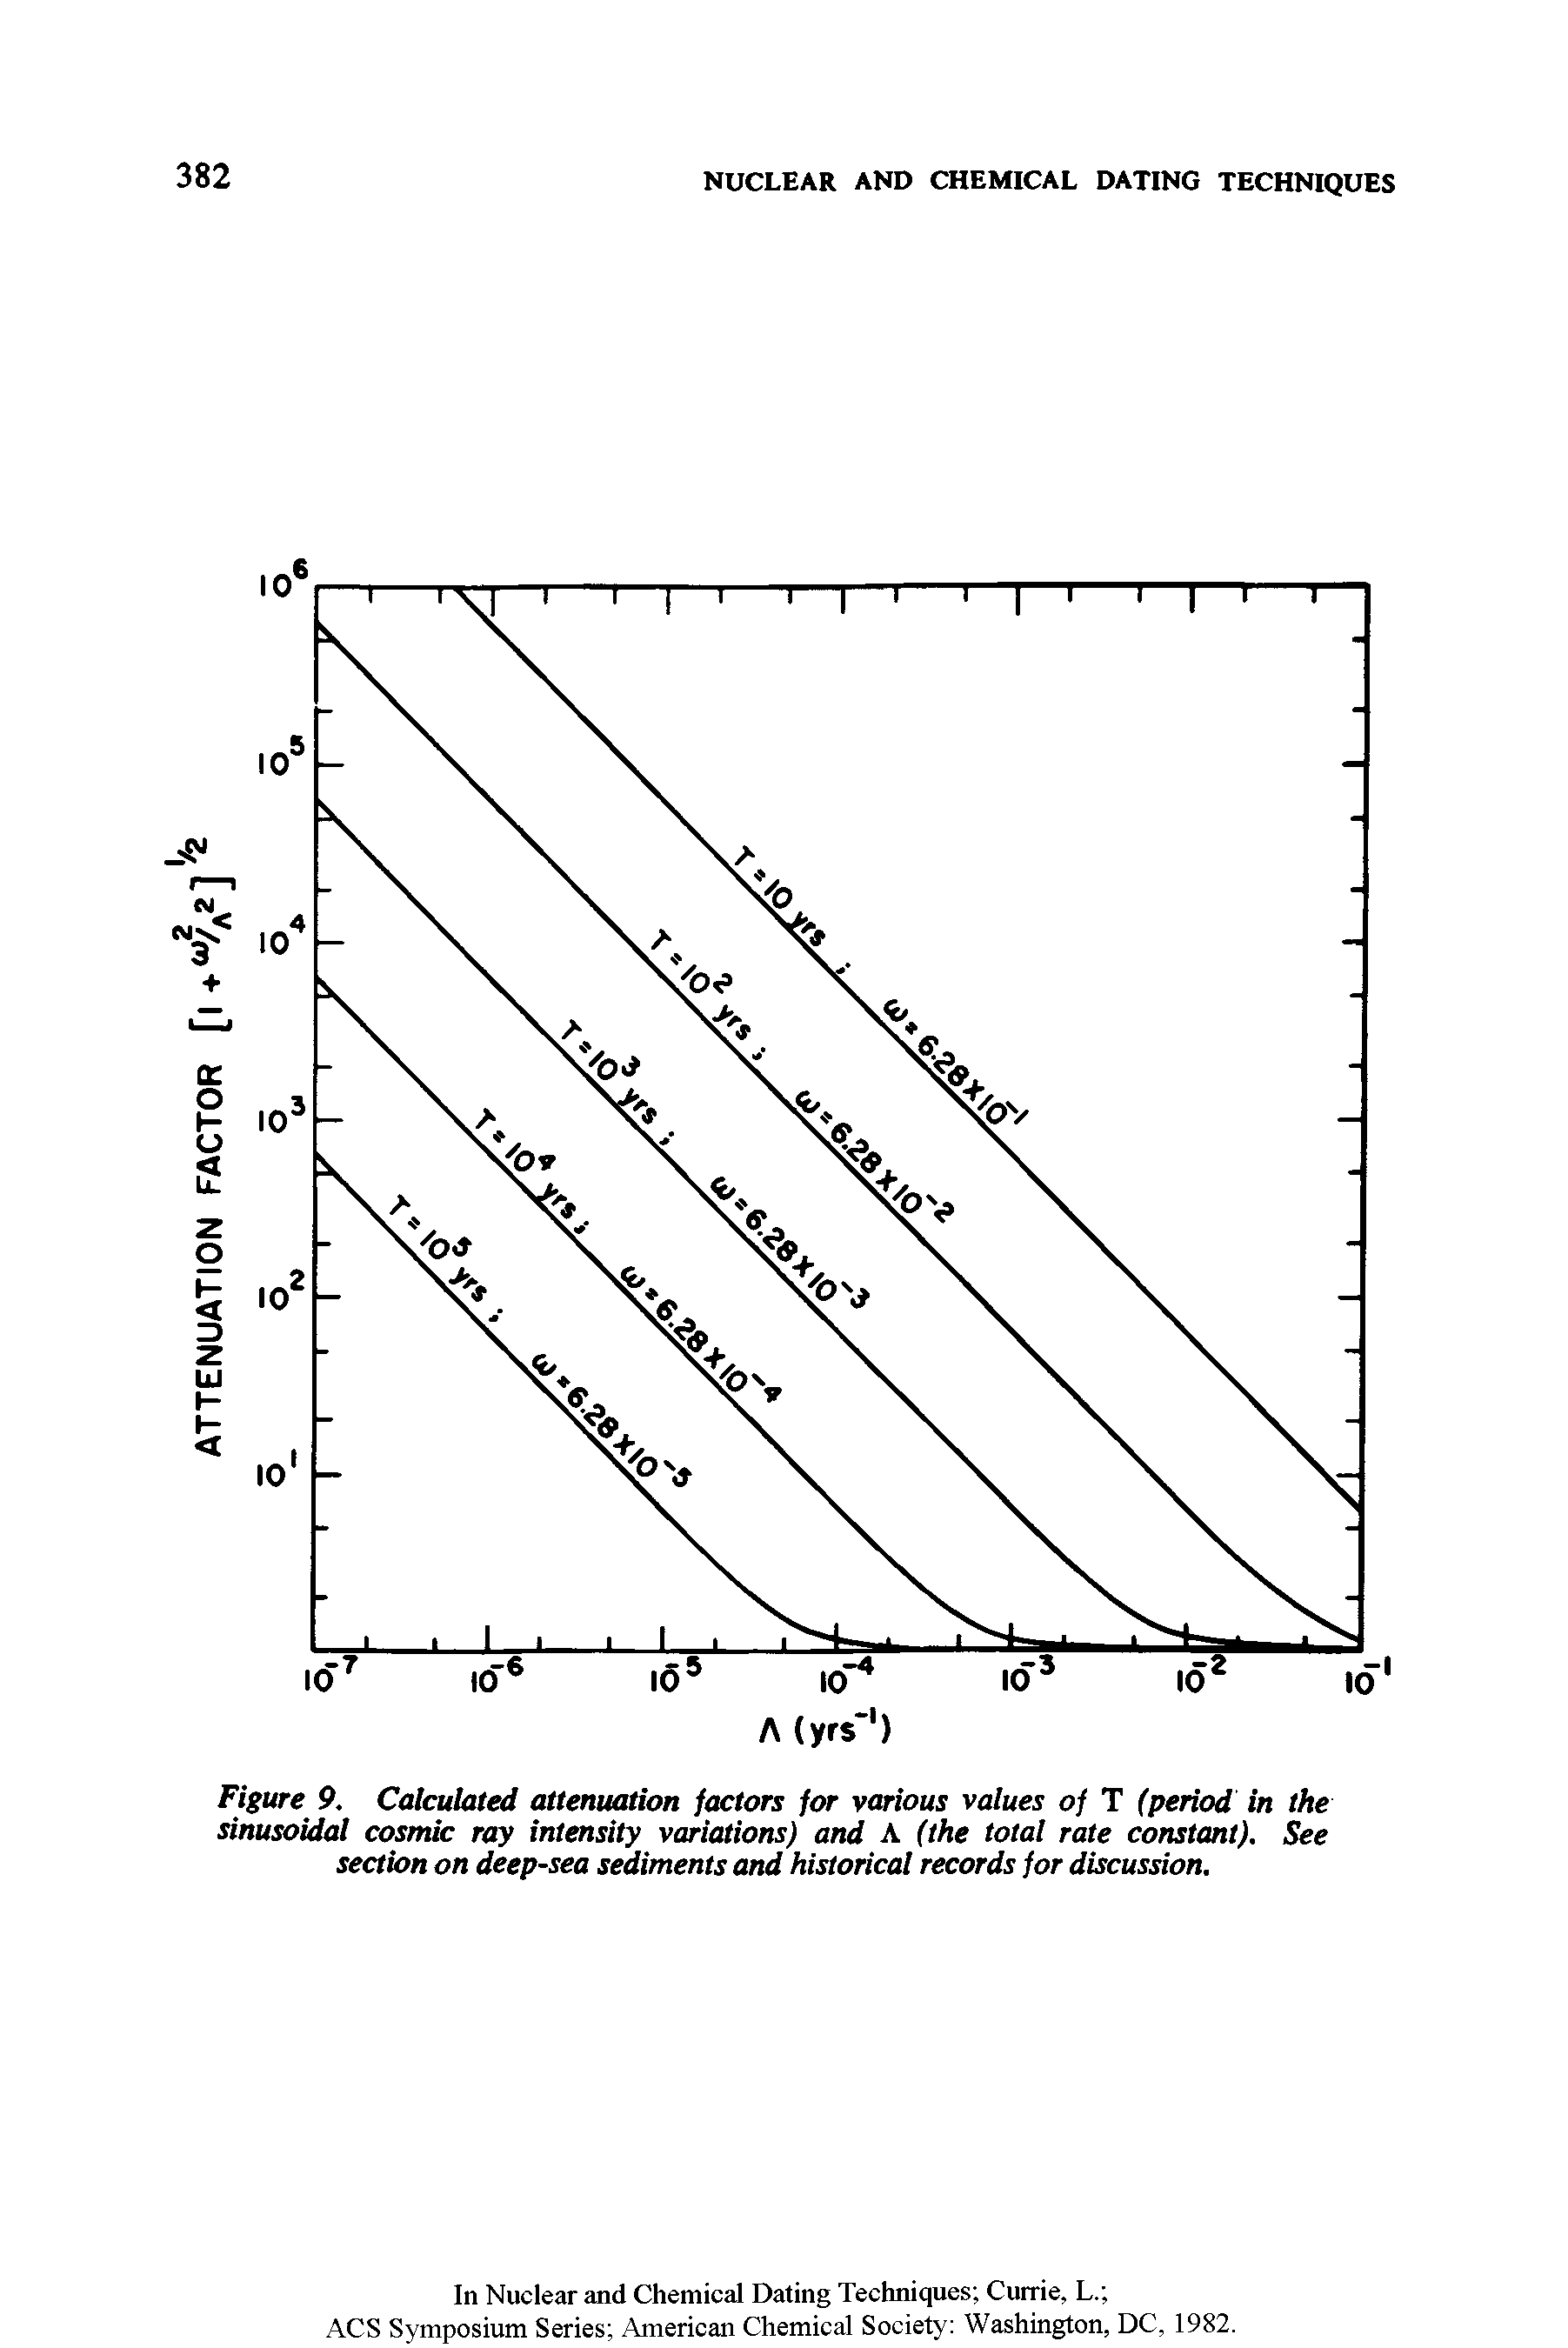 Figure 9. Calculated attenuation factors for various values of T (period in the sinusoidal cosmic ray intensity variations) and A (the total rate constant). See section on deep-sea sediments and historical records for discussion.